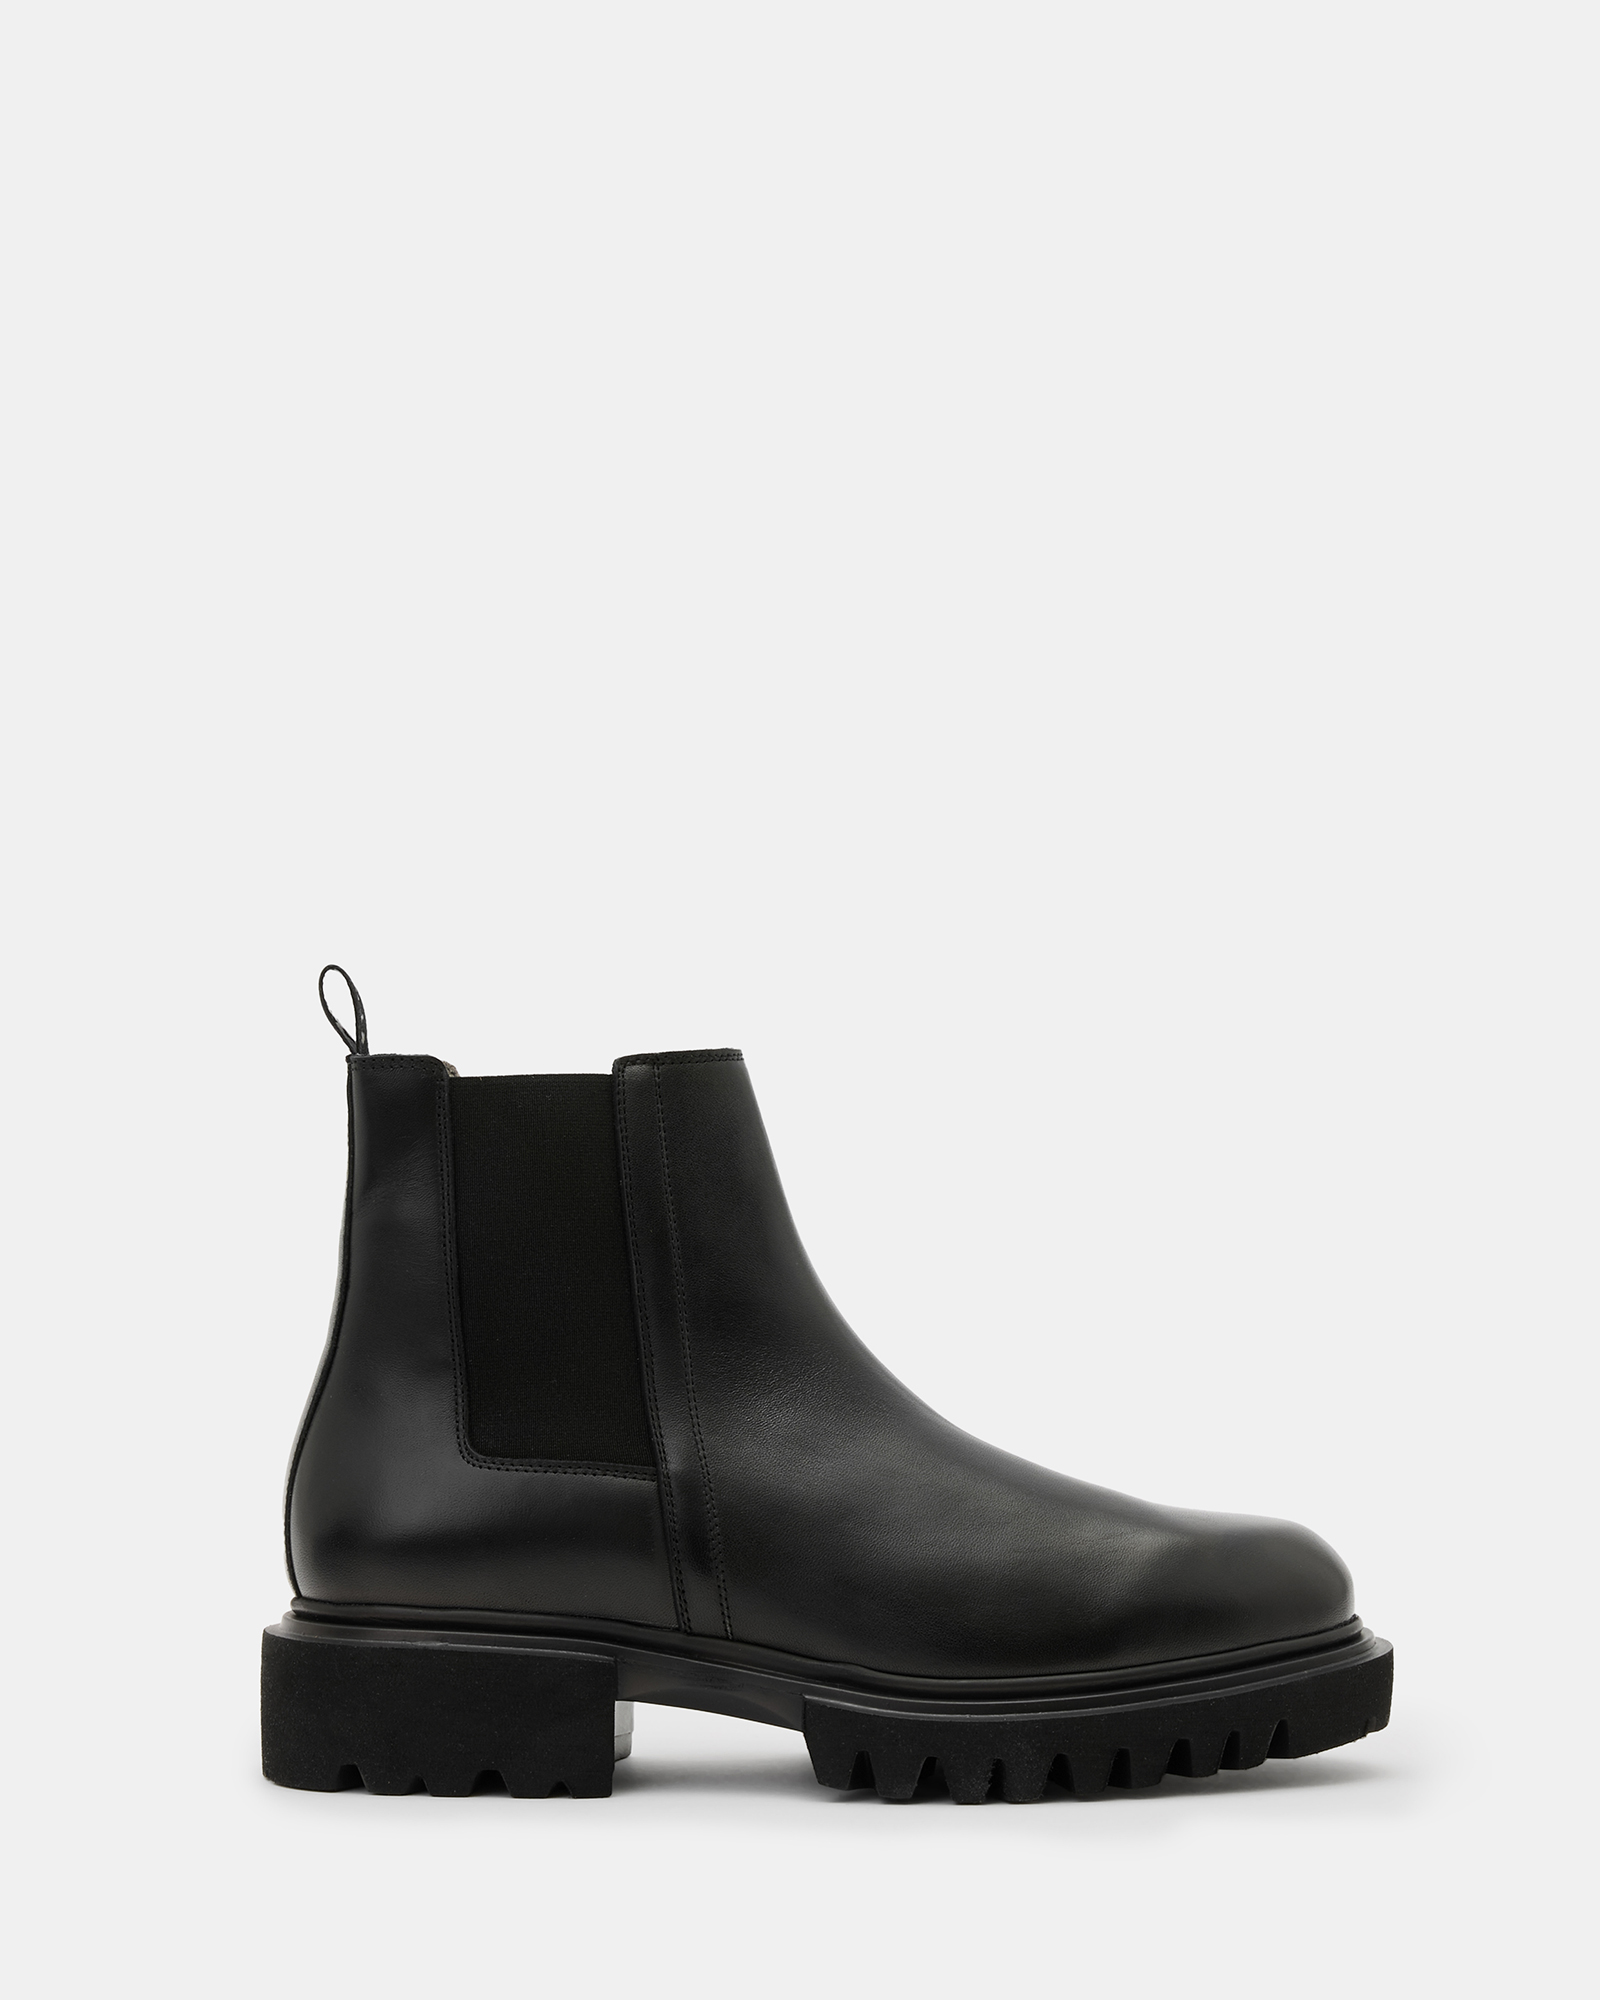 Vince Chunky Leather Boots Black | ALLSAINTS US